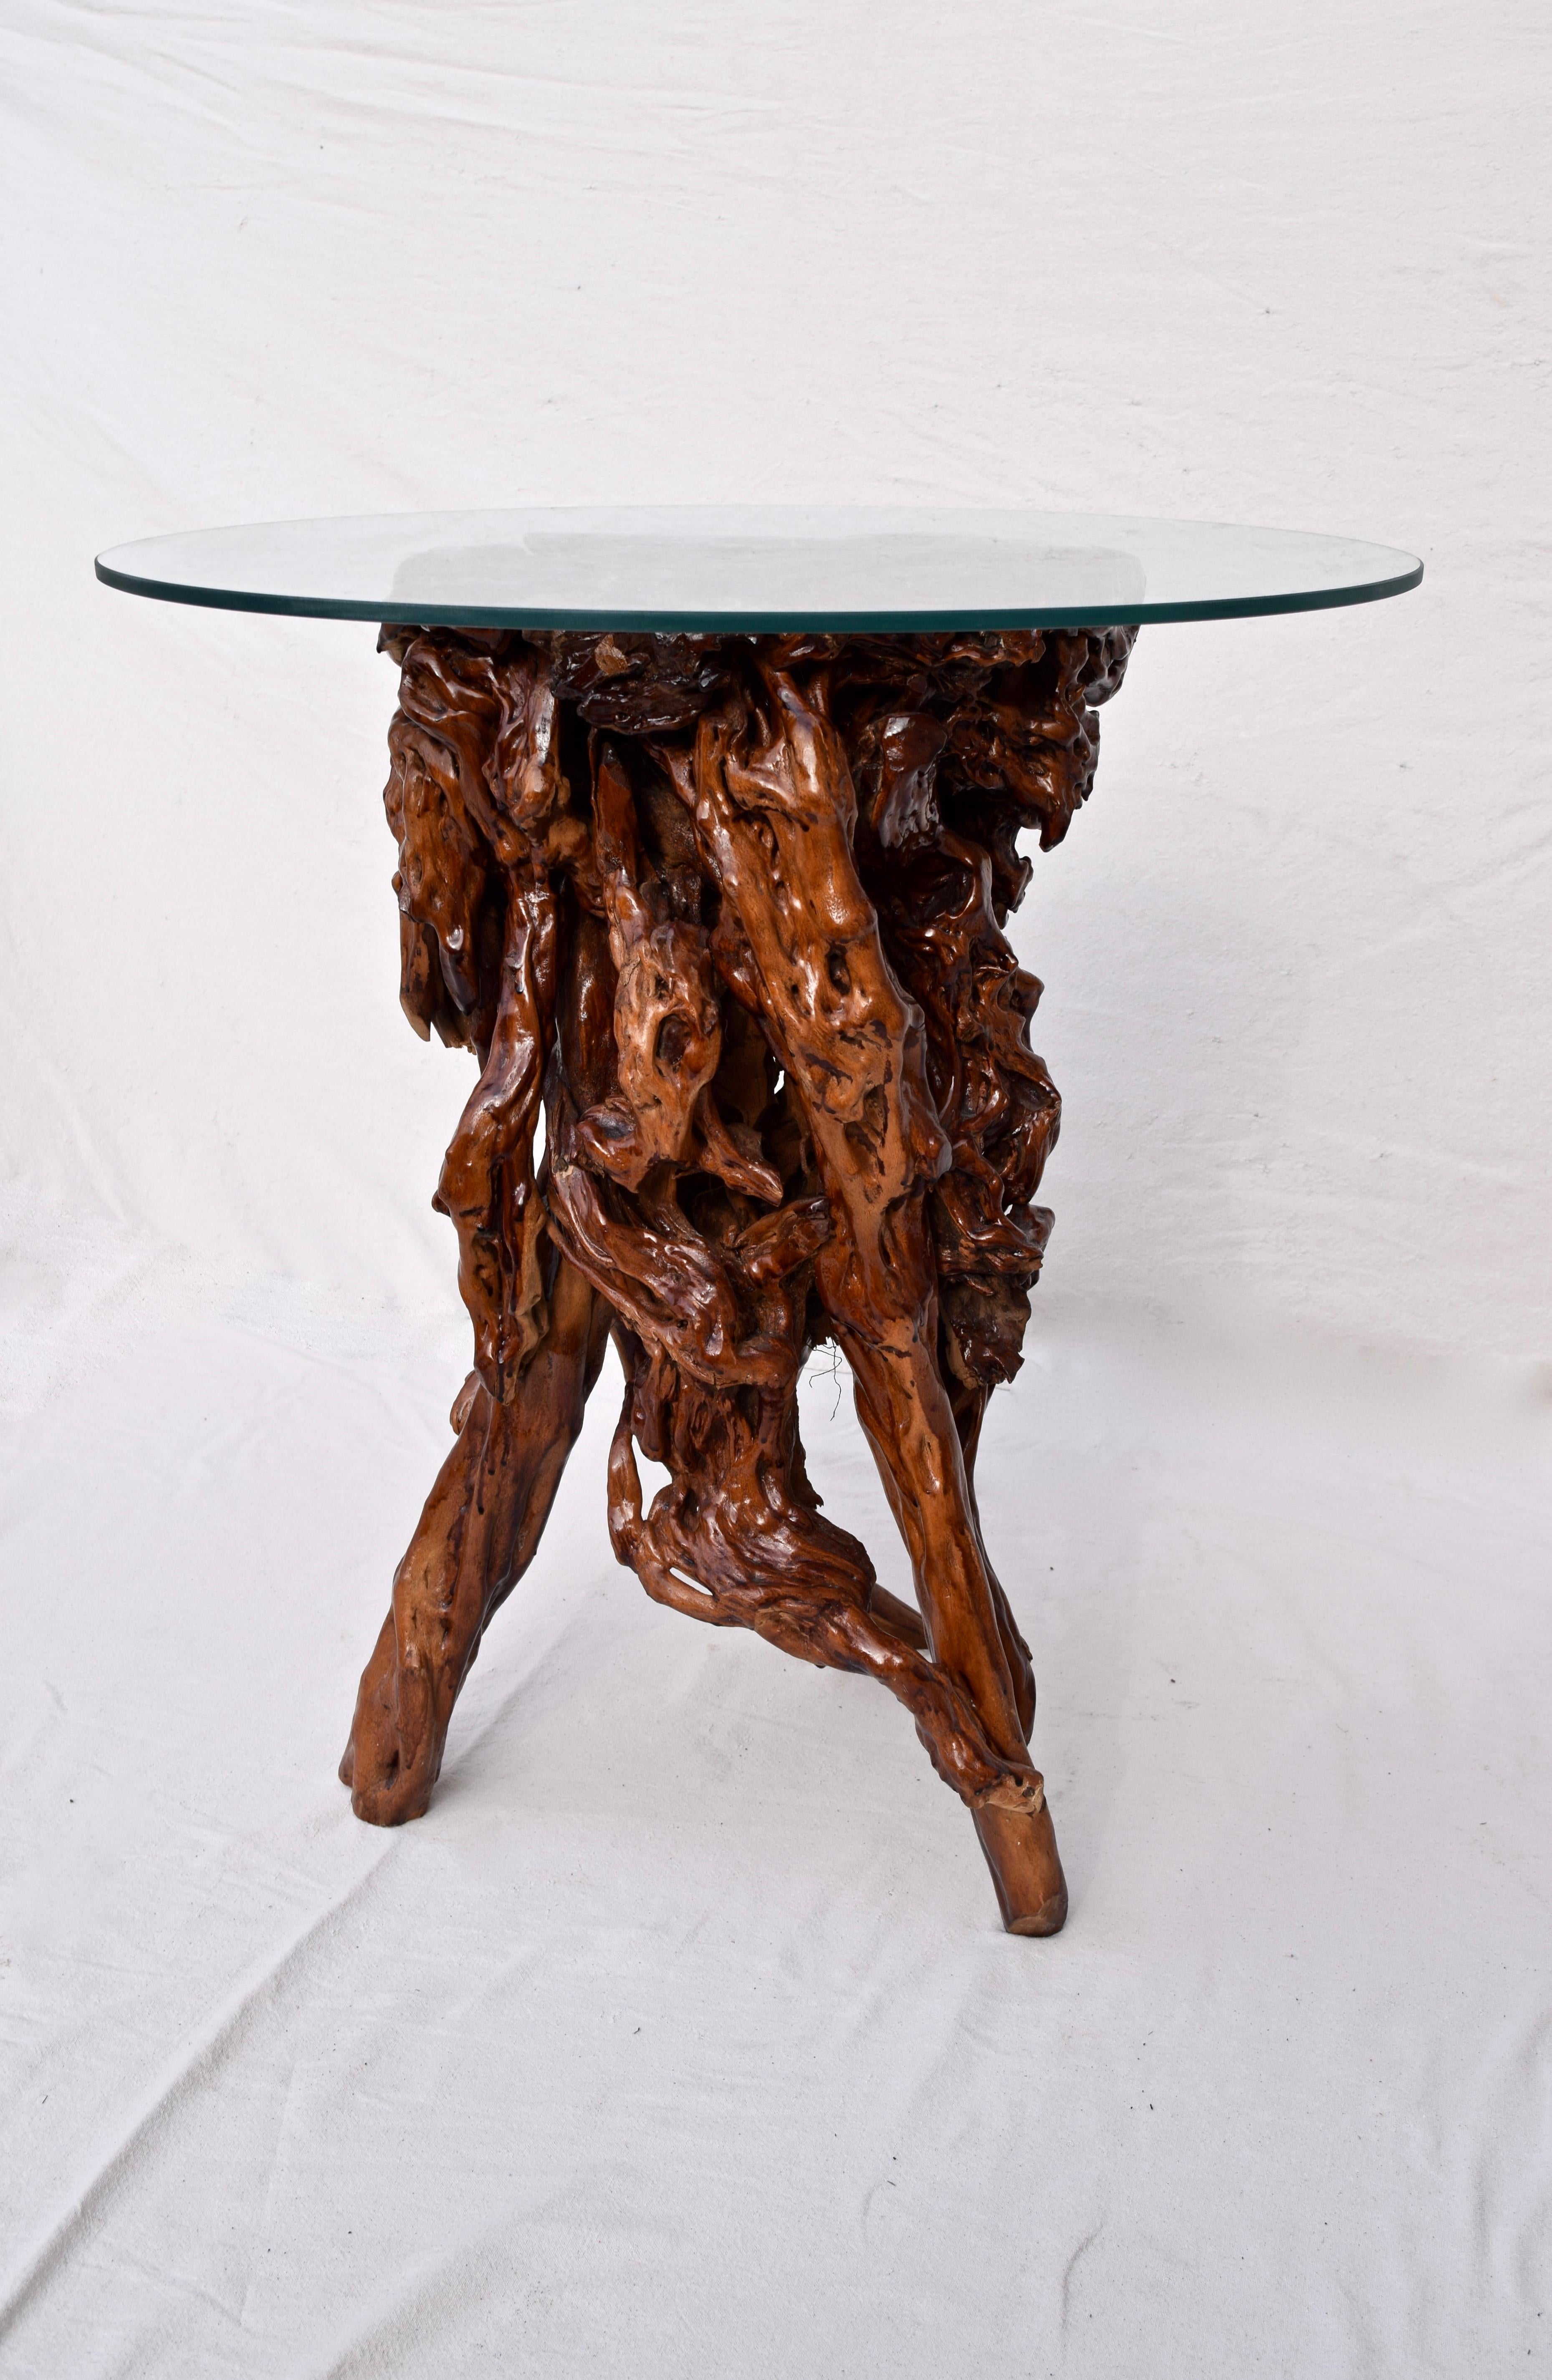 Very old lacquered Chinese root system of sculptural organic form with circular glass top. Functional & aesthetically pleasing for display or table use. Glass top is 29